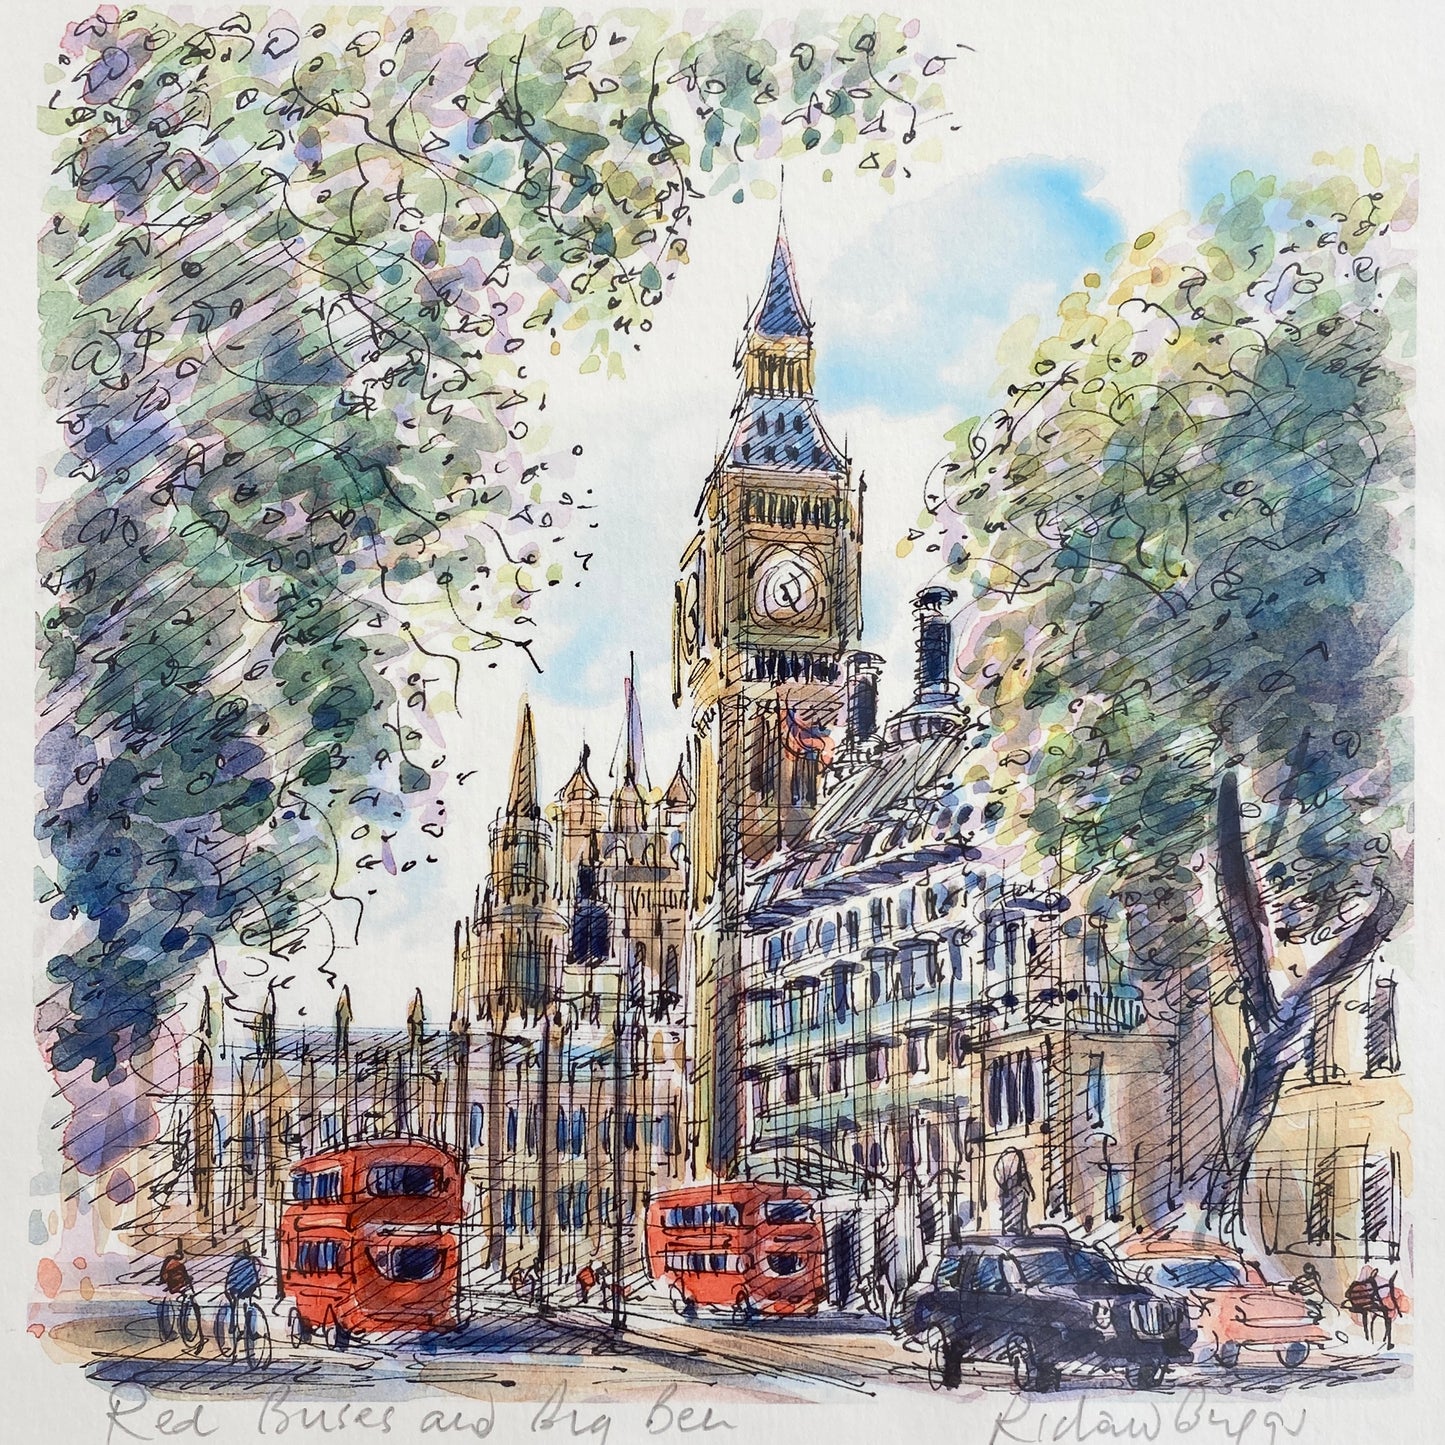 Red Buses and Big Ben